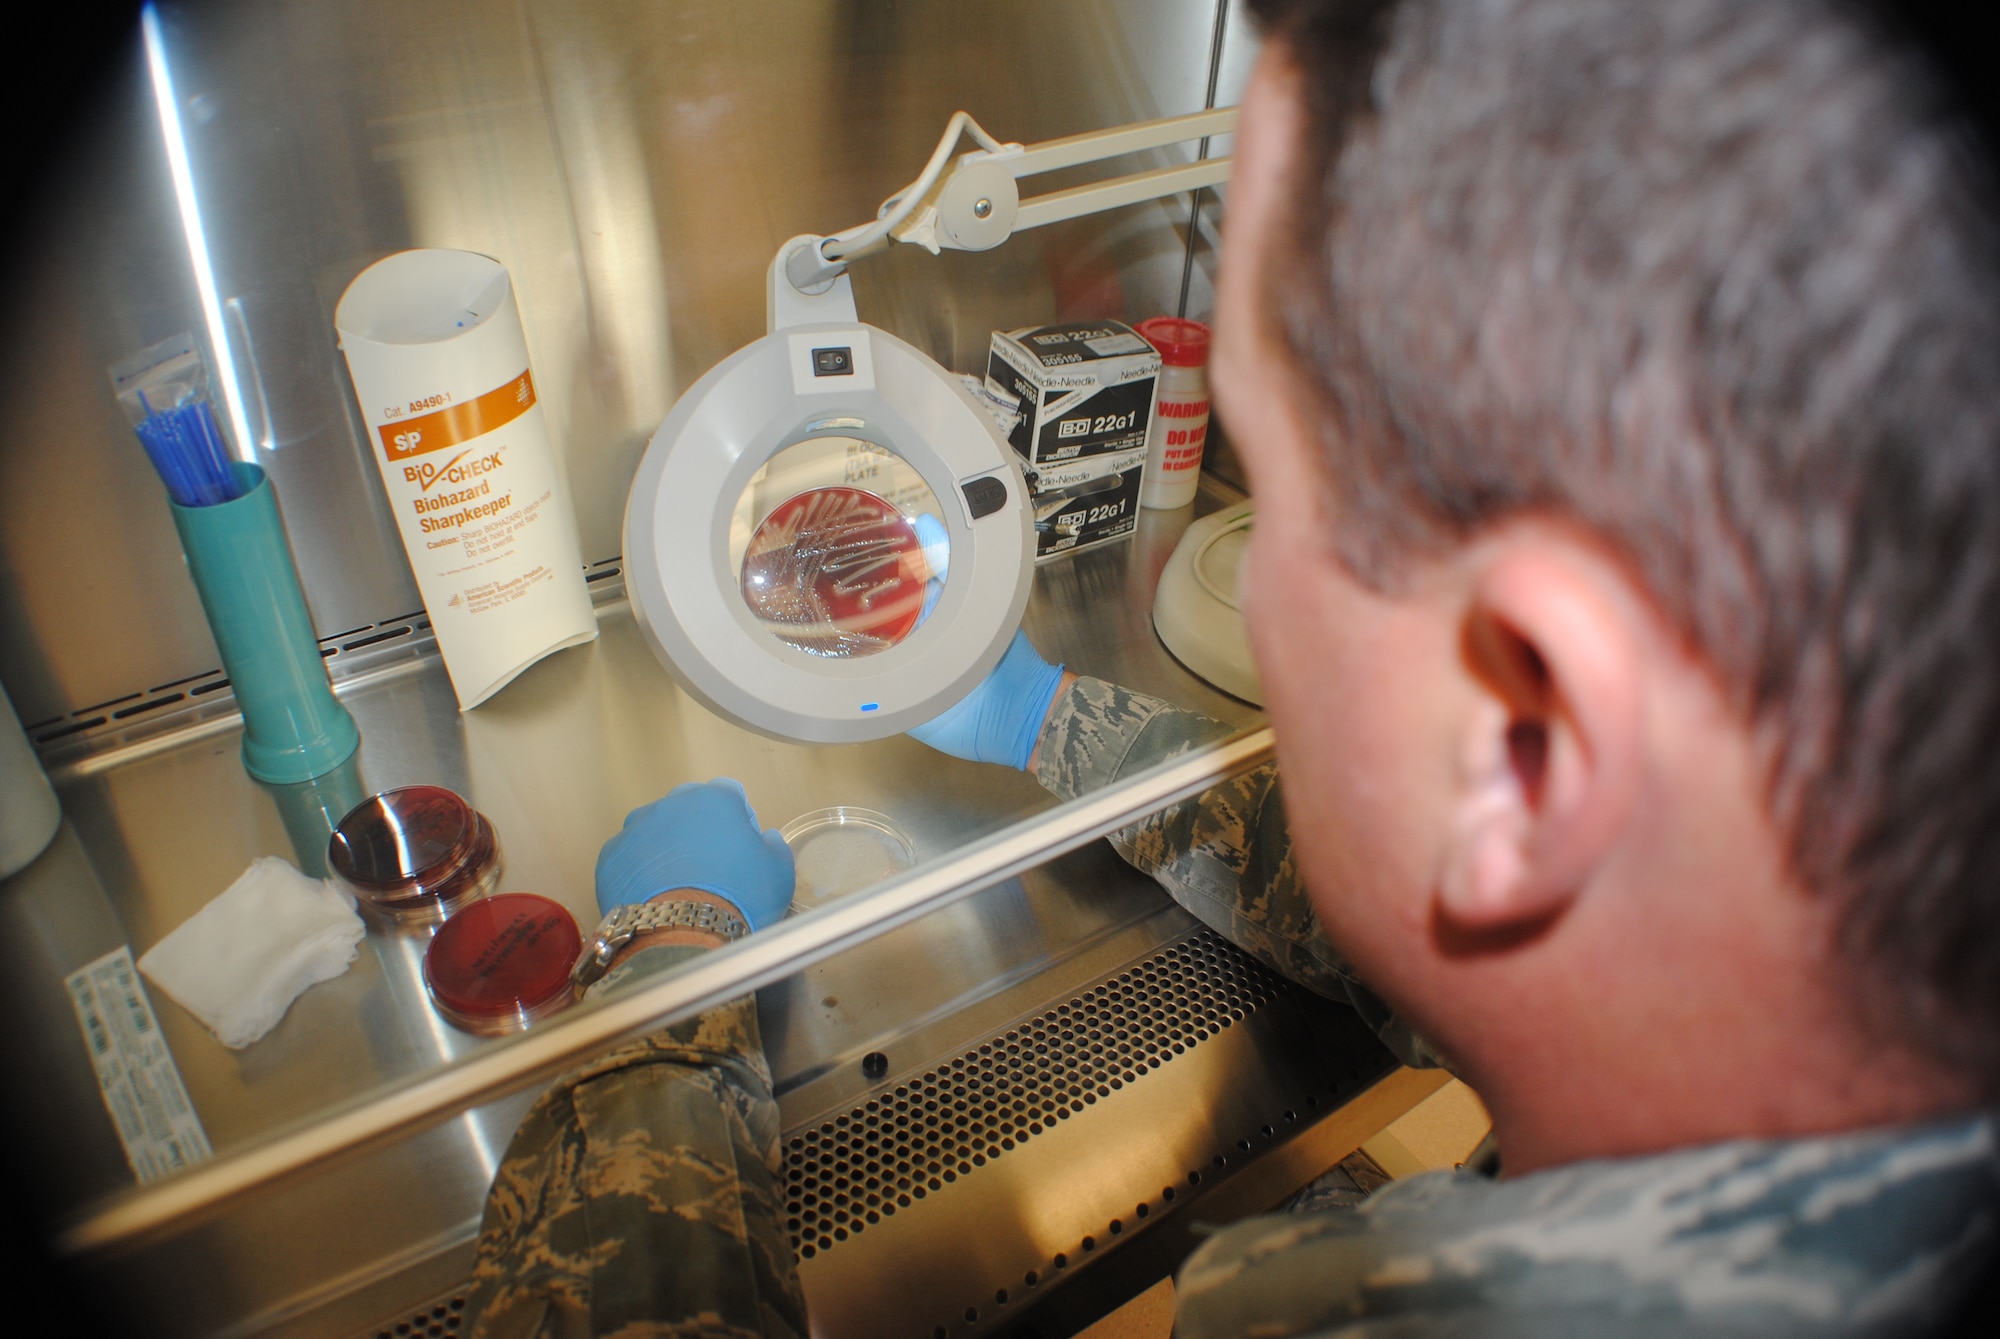 Staff Sgt. Thomas C. Sullivan Jr., 319th Medical Support Squadron laboratory technician, checks the growth progress of a bacteria cultures using a magnifying lamp inside a bio-safety examining cabinet inside the medical laboratory on May 22, 2013, at Grand Forks Air Force Base, N.D. Medical lab technicians grow various cultures of bacteria to test the effectiveness of chemical dyes, which are then used to identify various types of illnesses in laboratory samples. (U.S. Air Force photo/Staff Sgt. Luis Loza Gutierrez)
